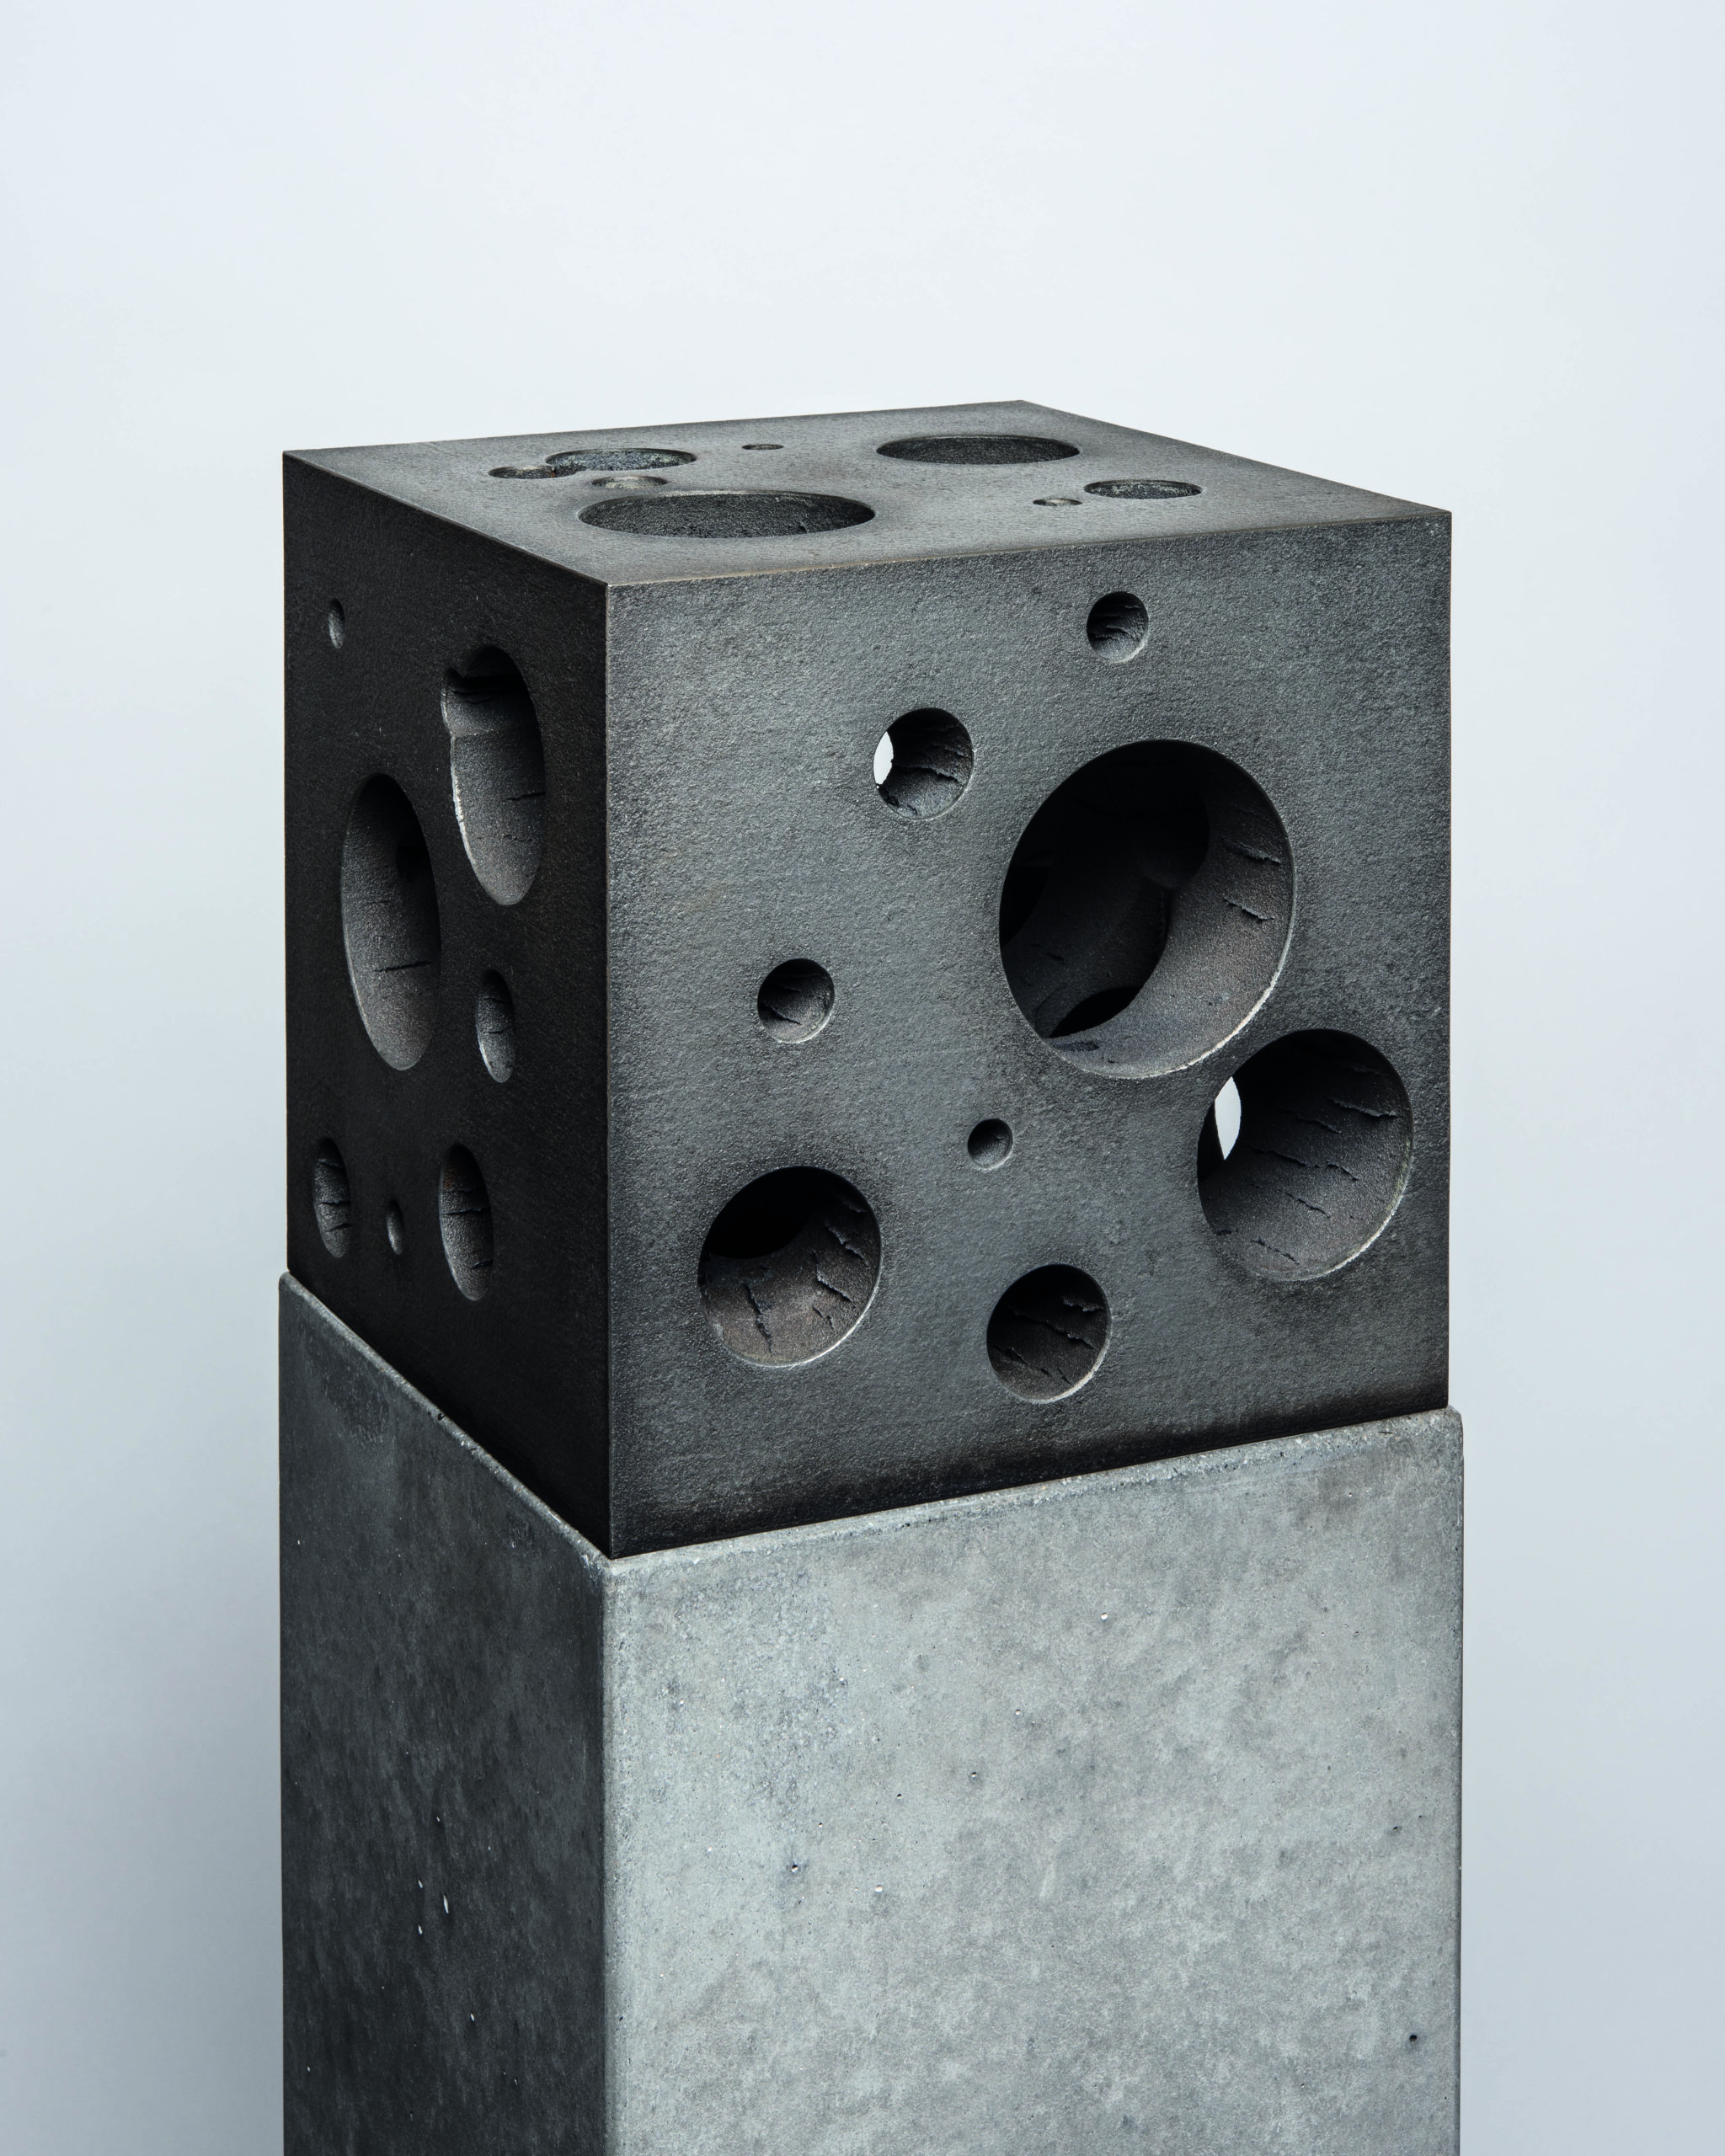 

											Tom Joyce</b>

											<em>
												Core Series</em> 

											<h4>
												Santa Fe: May 6 - September 24, 2022											</h4>

		                																																													<i>Core Negative II,</i>  
																																								2013 (cast) - 2015 (finished), 
																																								cast ductile iron, natural finish (steel filings from projects 1977-2013), concrete, 
																																								10 x 10 x 10 inches 
																								
		                				